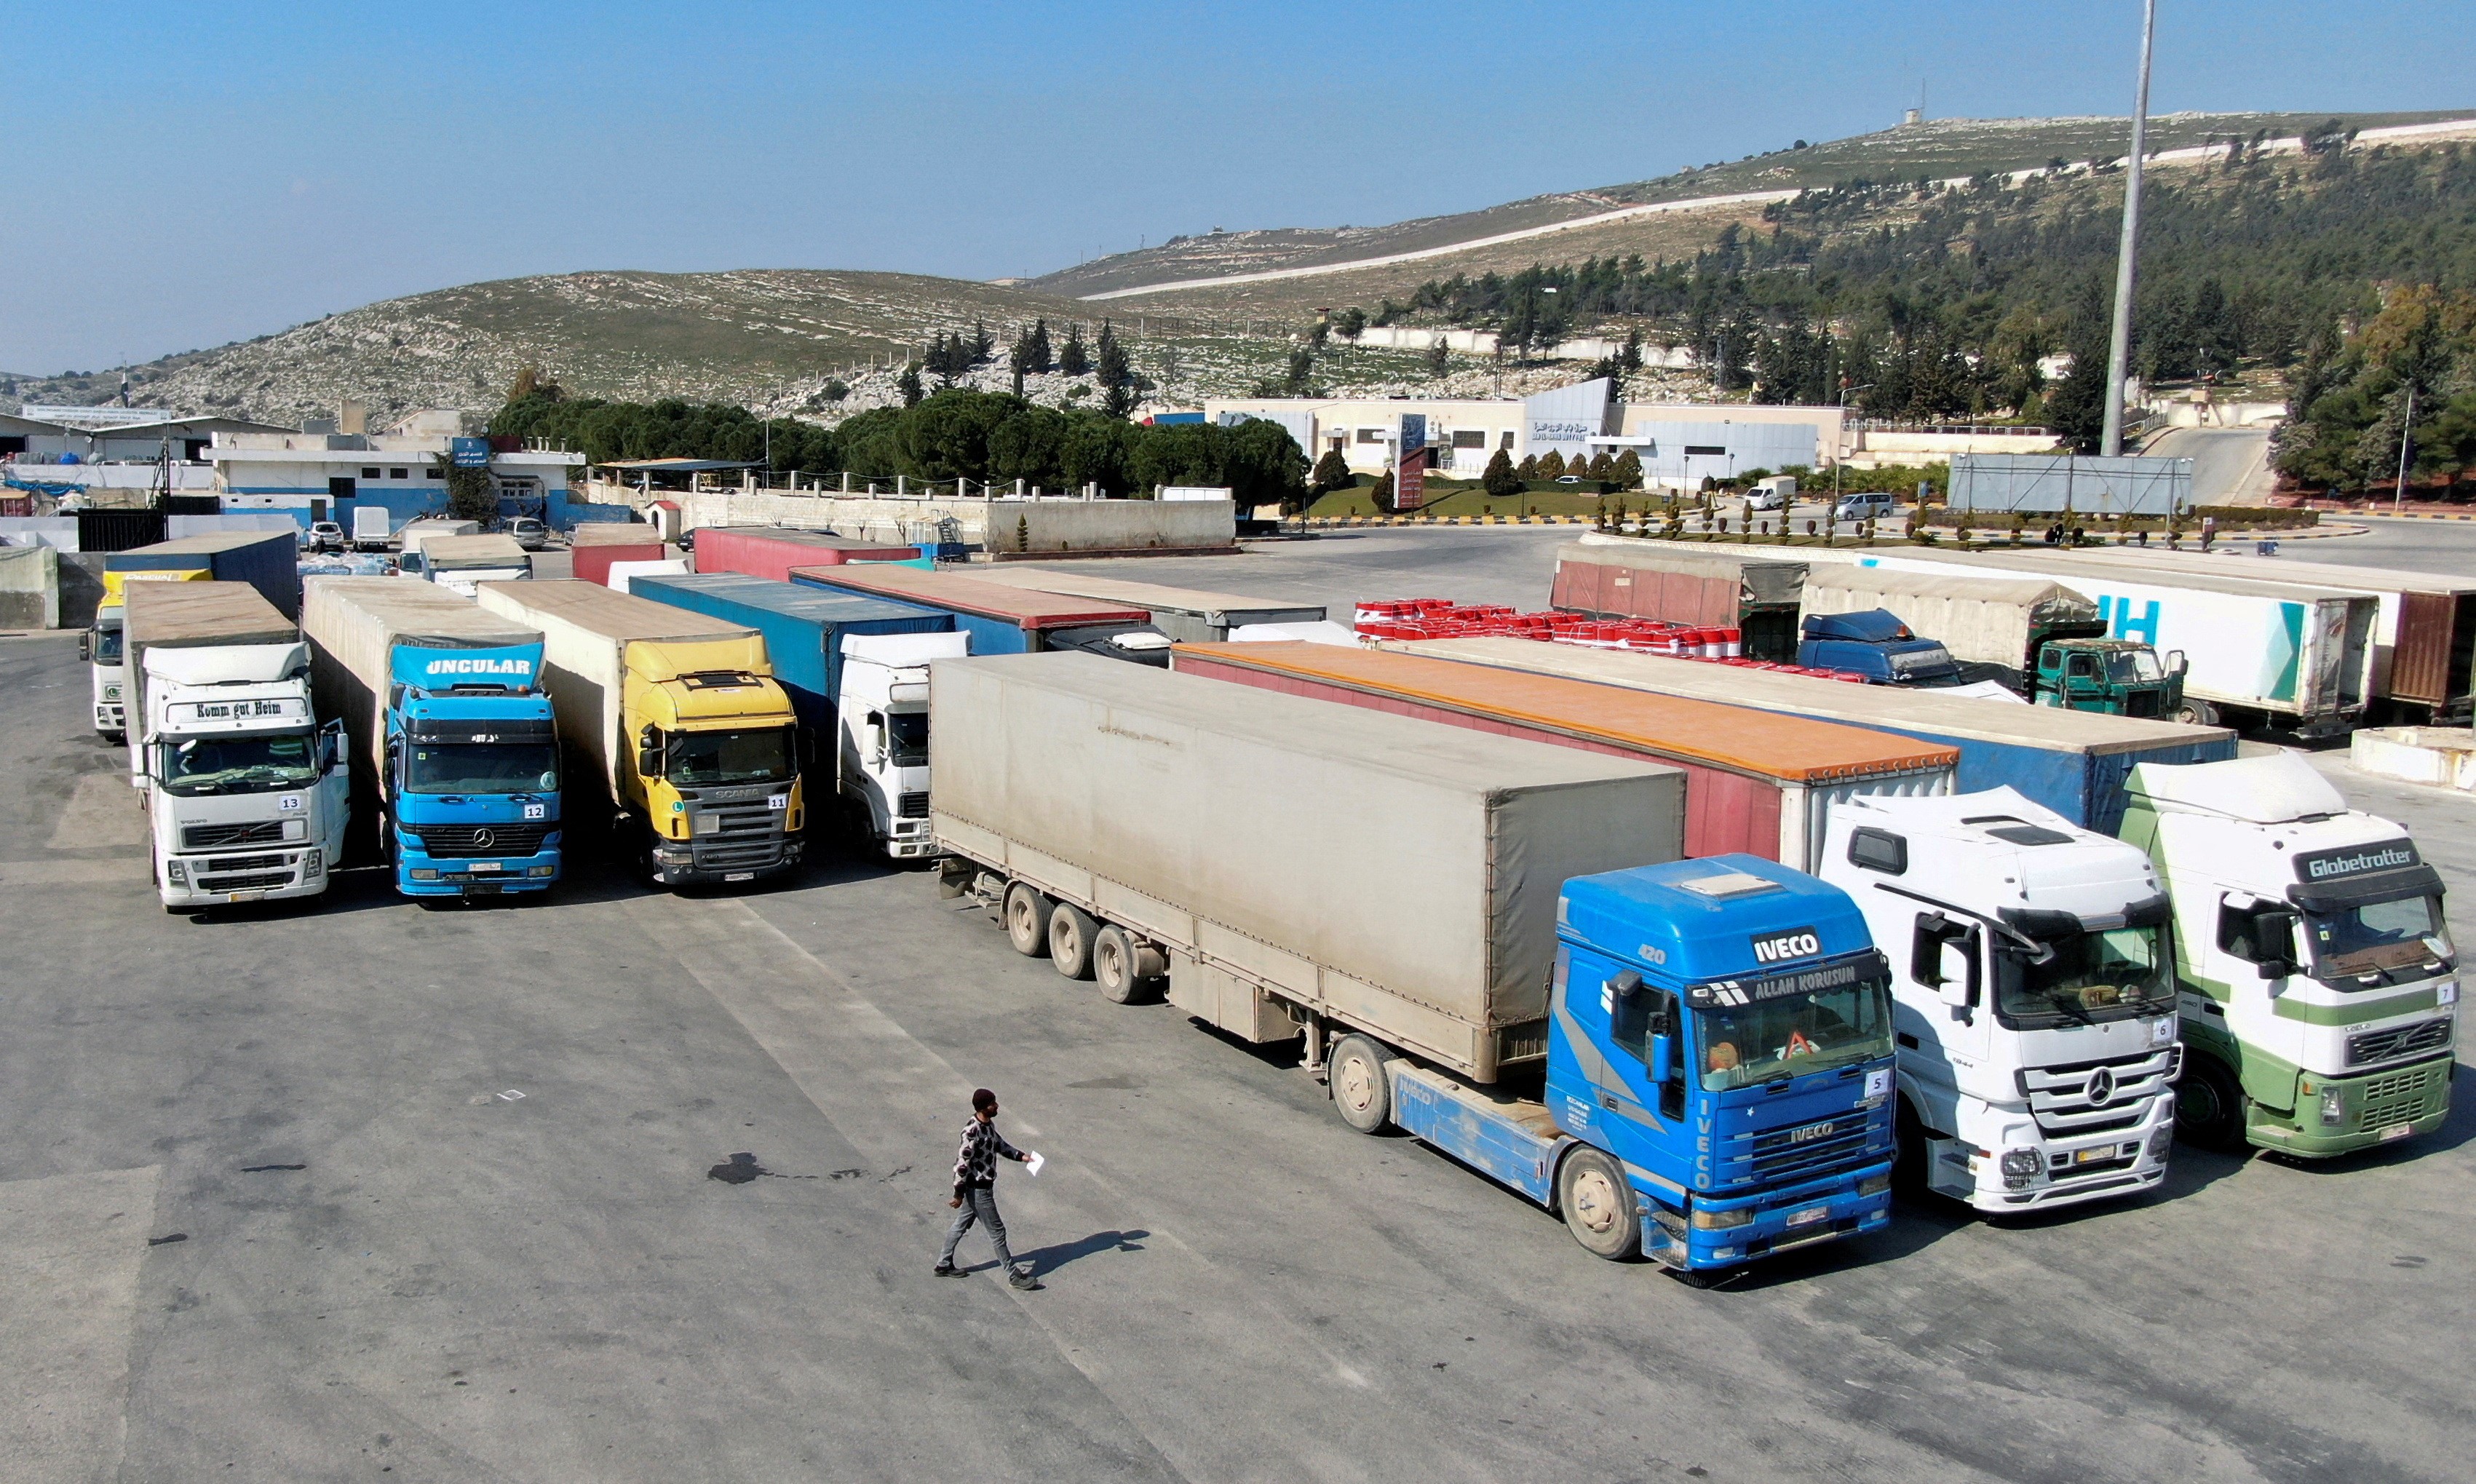 Trucks carrying aid from UN World Food Programme (WFP), following a deadly earthquake, are parked at Bab al-Hawa crossing, Syria February 20, 2023. Photo: Reuters